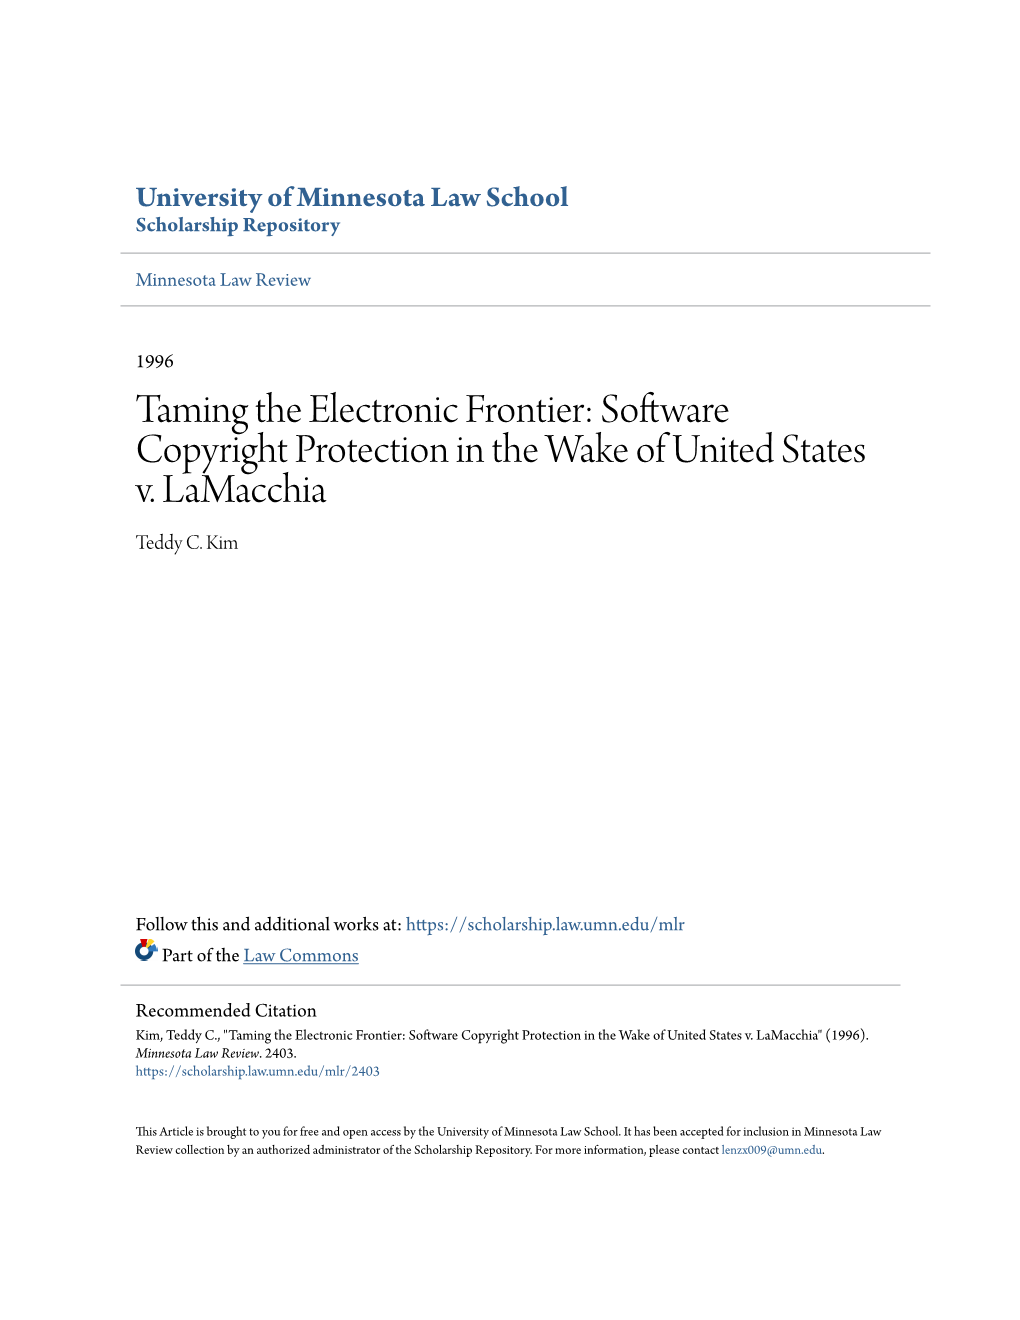 Taming the Electronic Frontier: Software Copyright Protection in the Wake of United States V